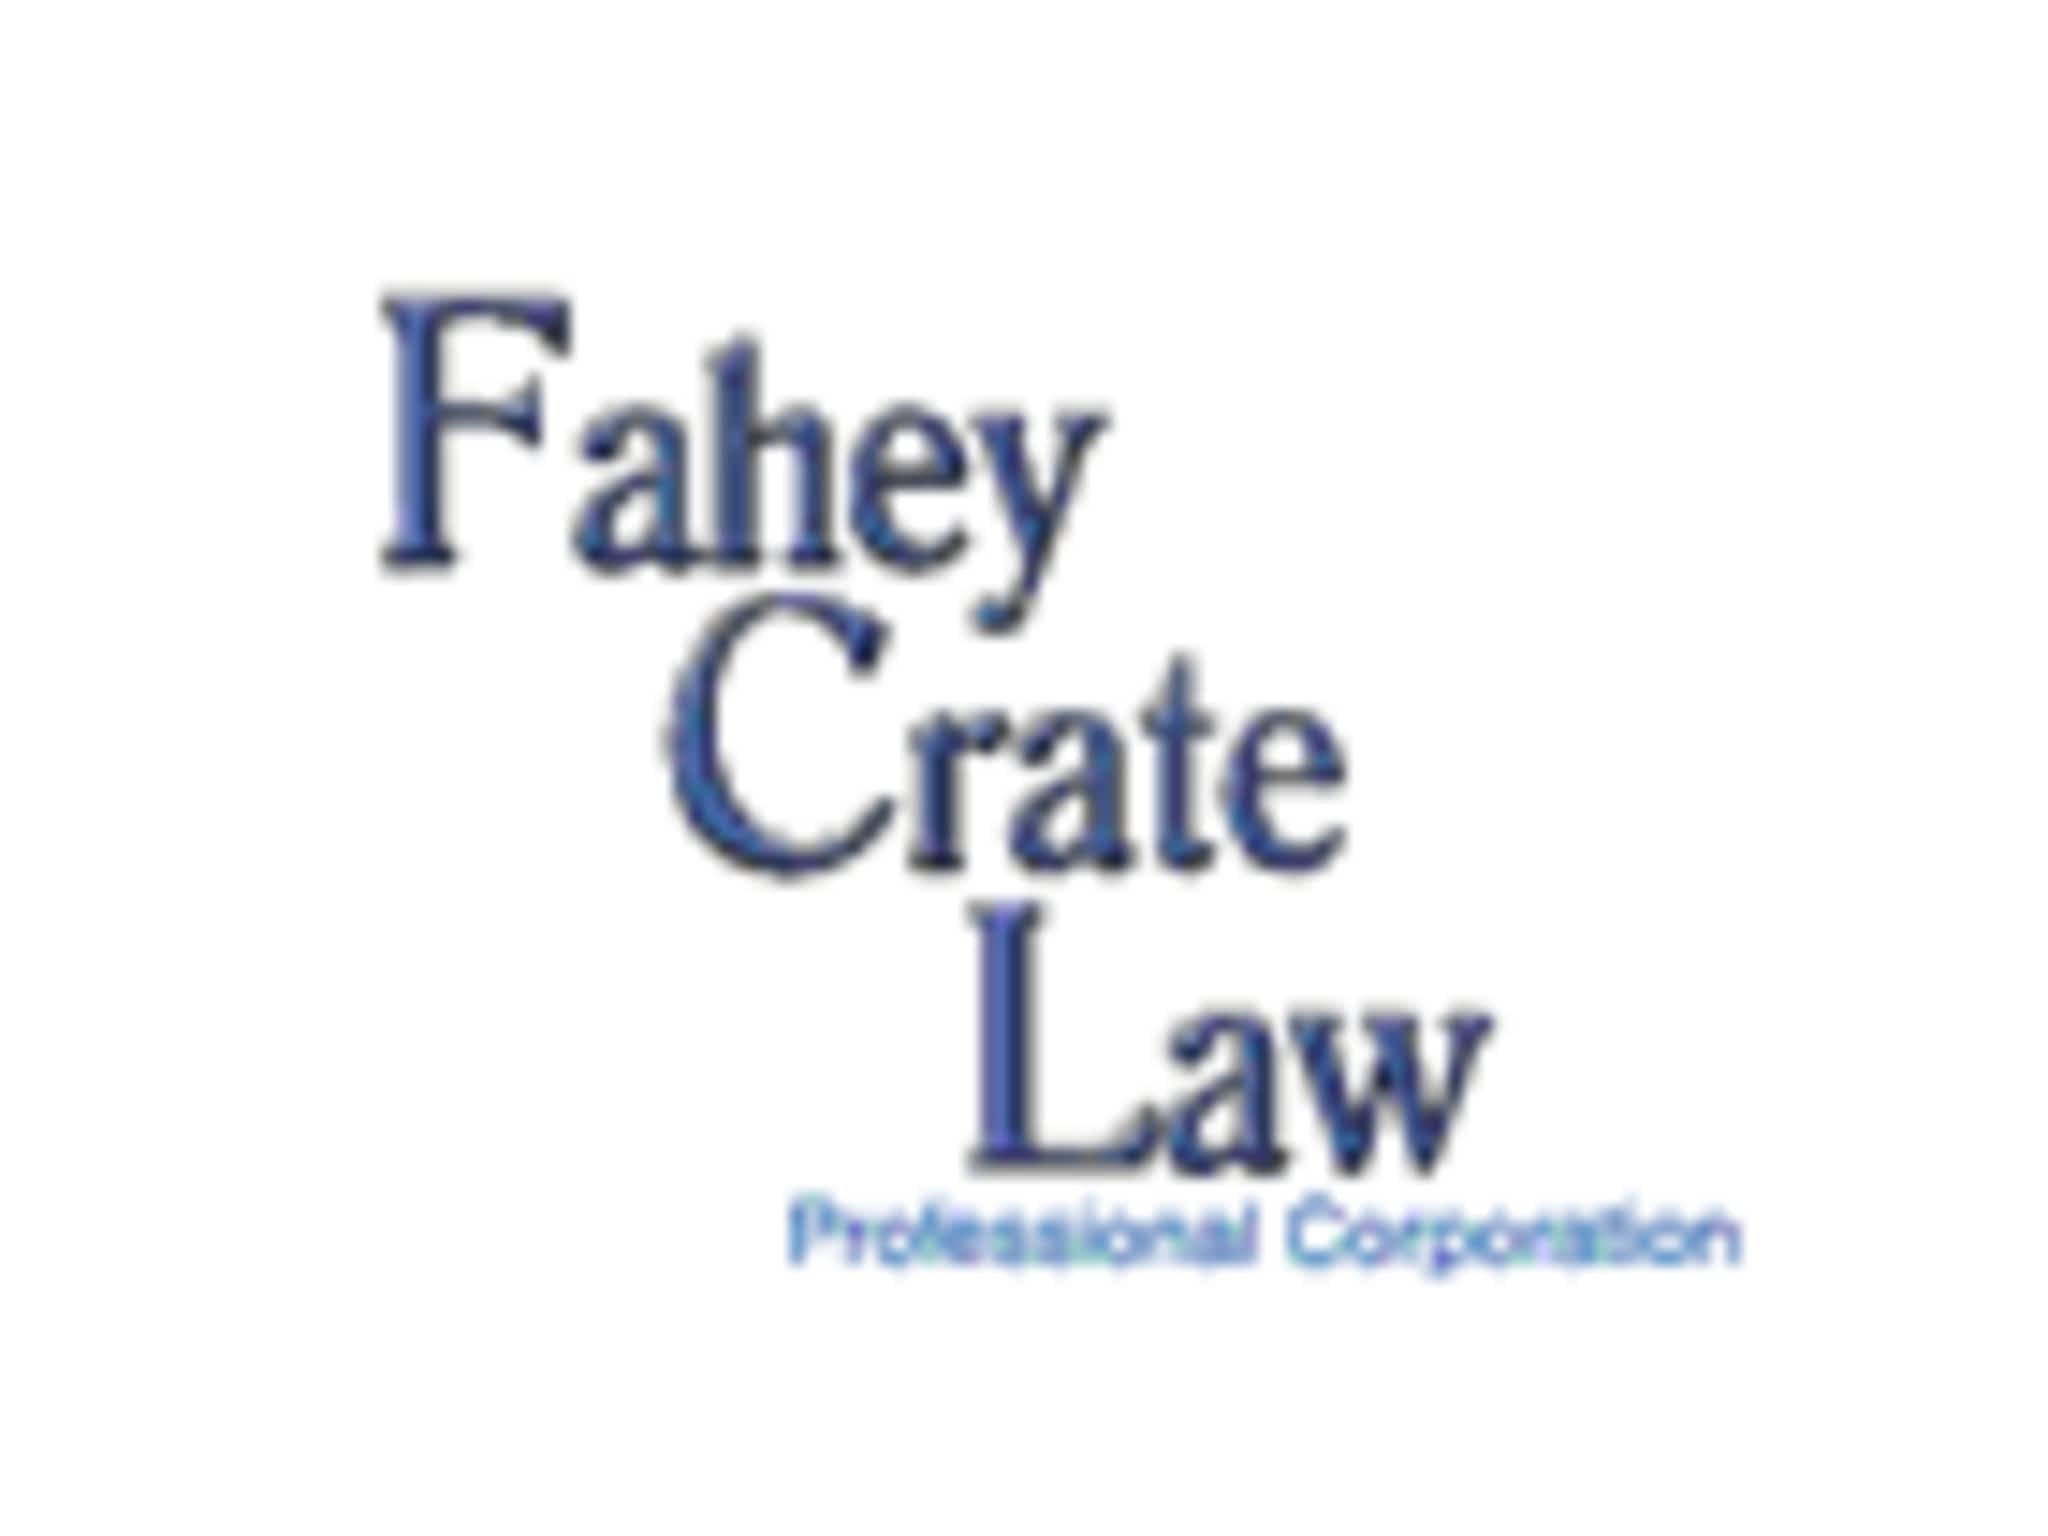 photo Fahey Crate Law